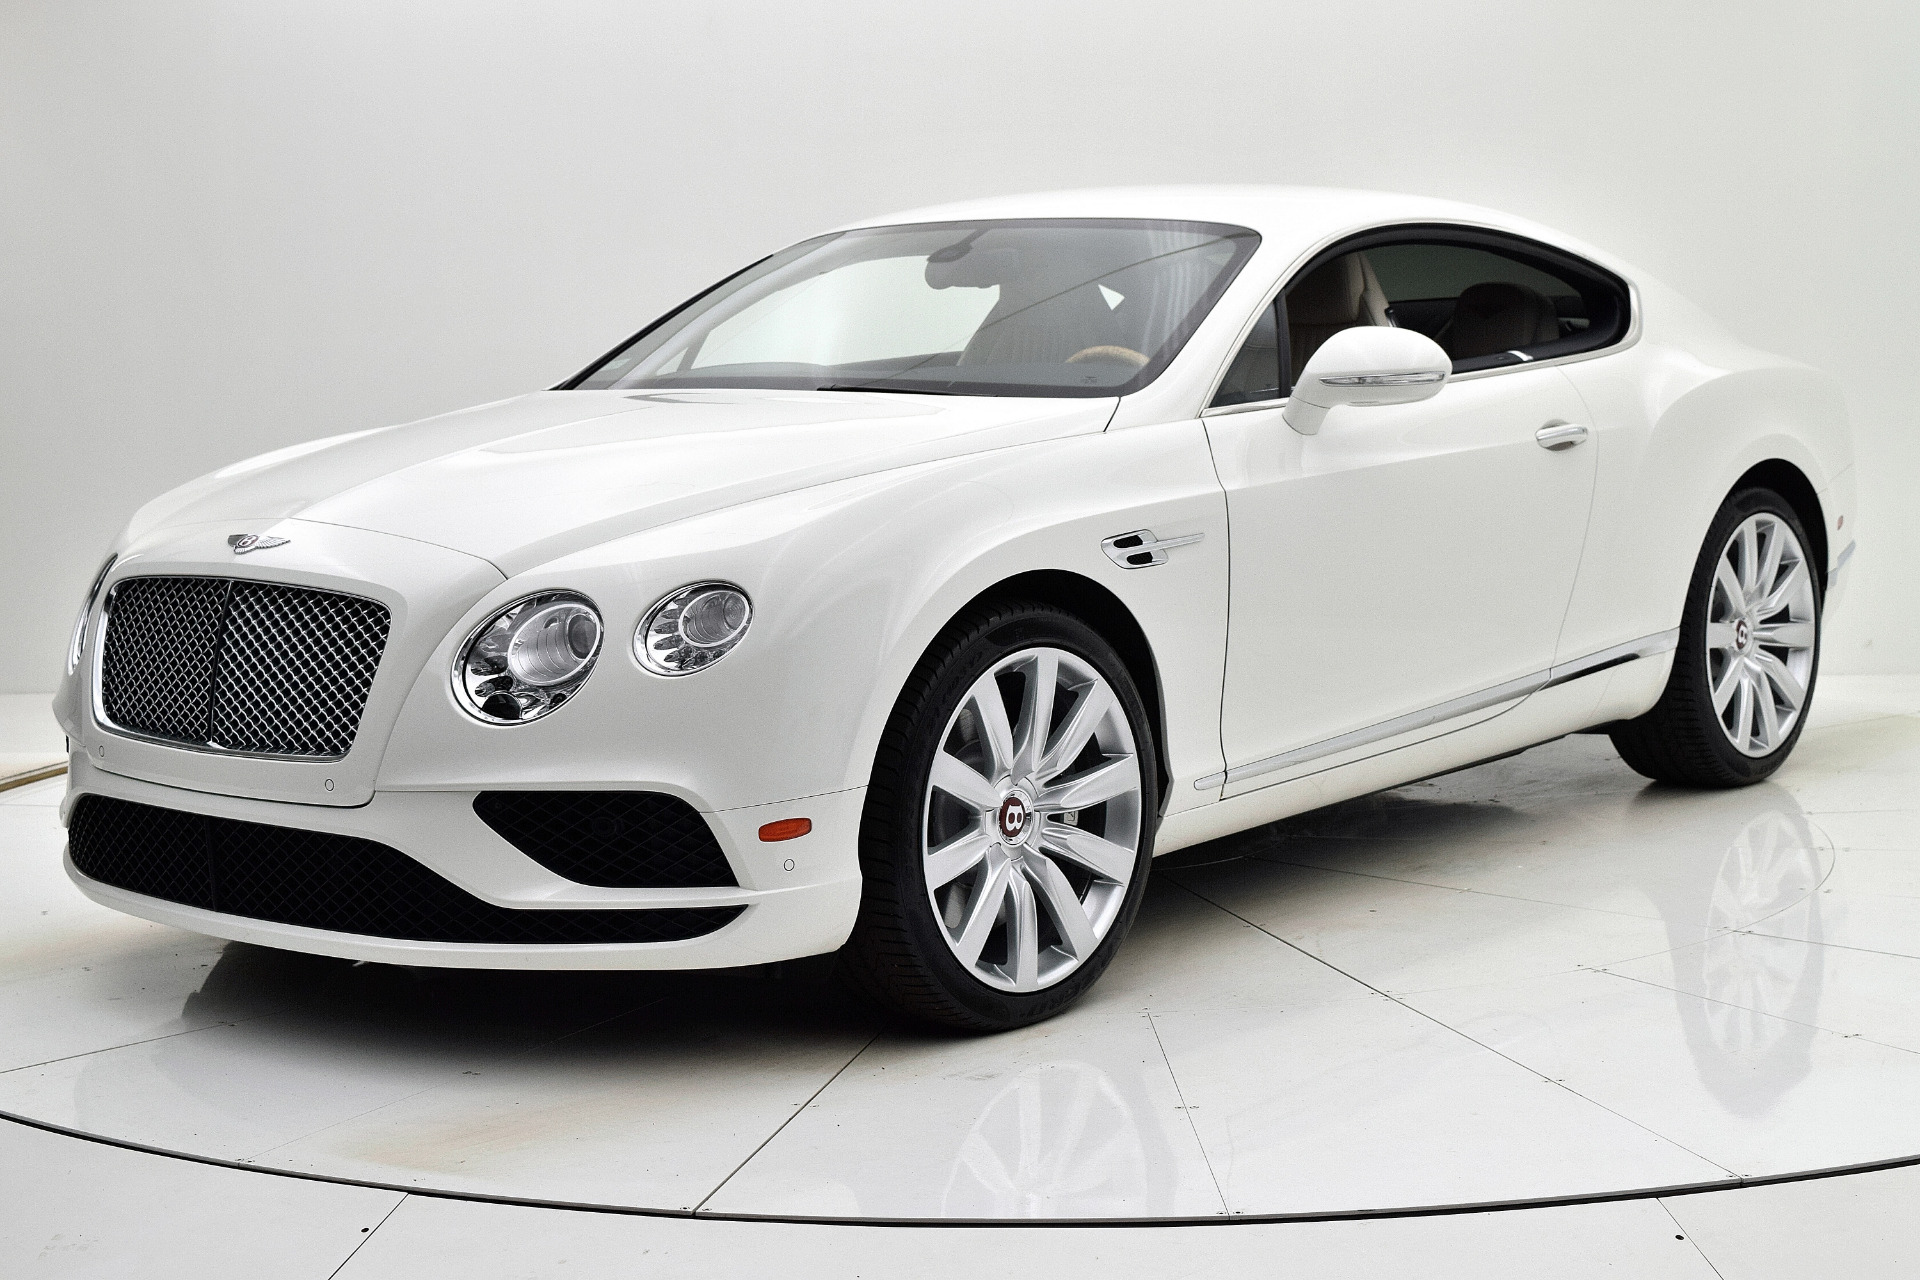 Used 2016 Bentley Continental GT V8 Coupe for sale Sold at Bentley Palmyra N.J. in Palmyra NJ 08065 2